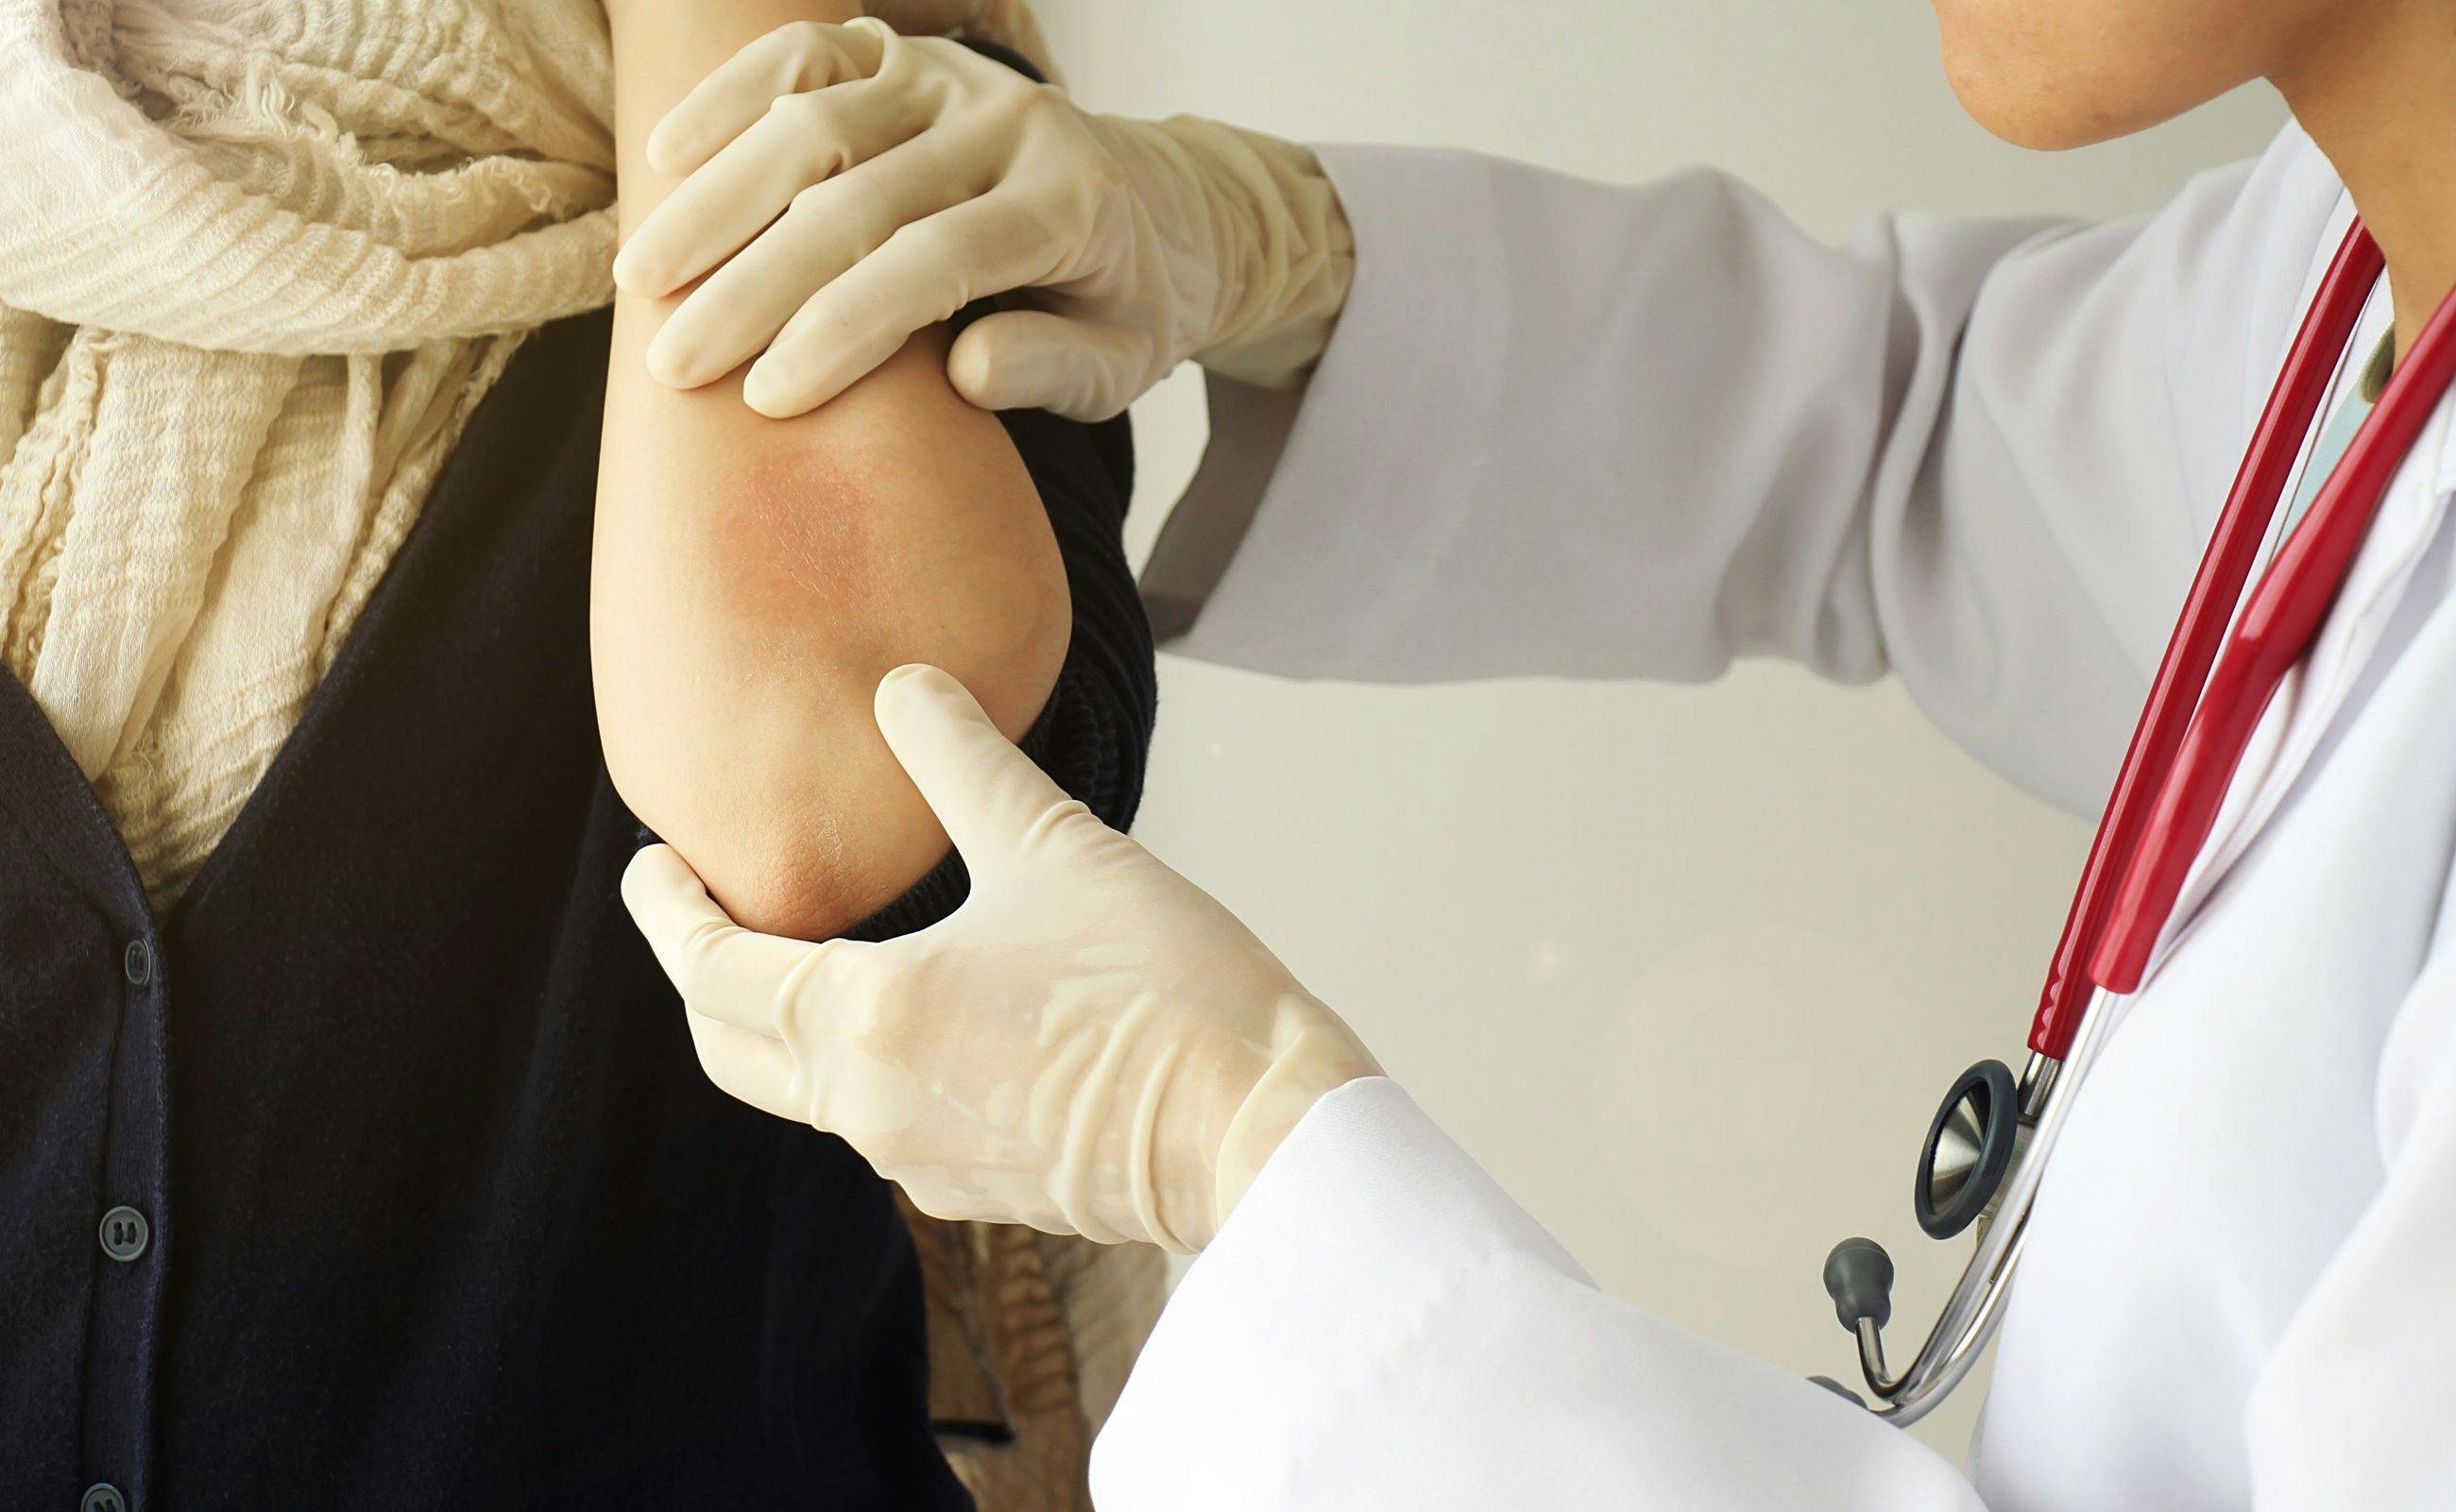 Physician assisting patient with psoriasis | Image Credit: © ARTFULLY-79 - stock.adobe.com